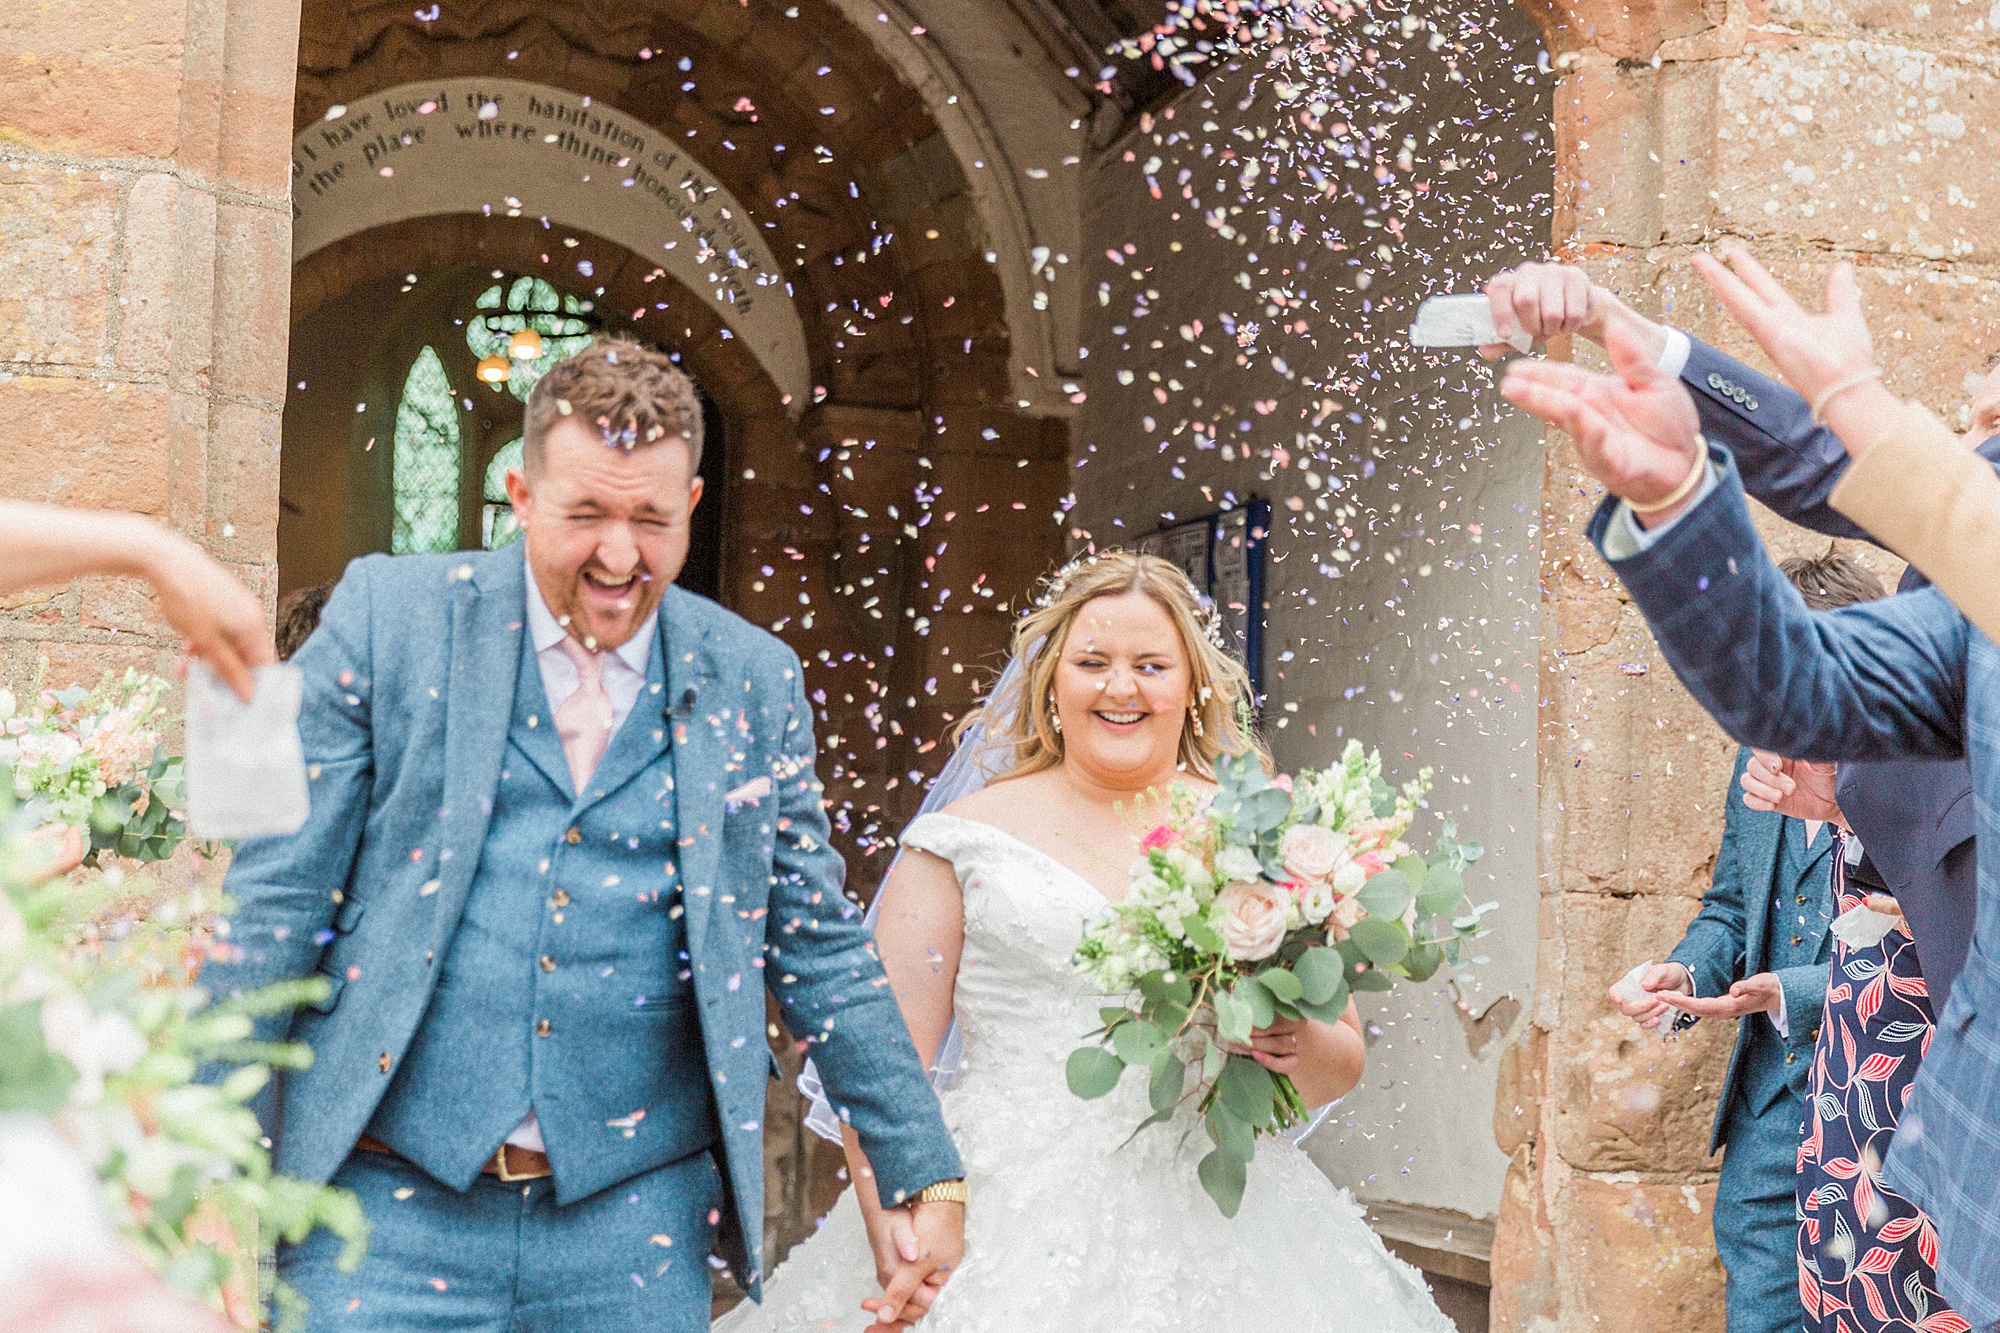 photo of a bride and groom leaving the church under a flurry of confetti